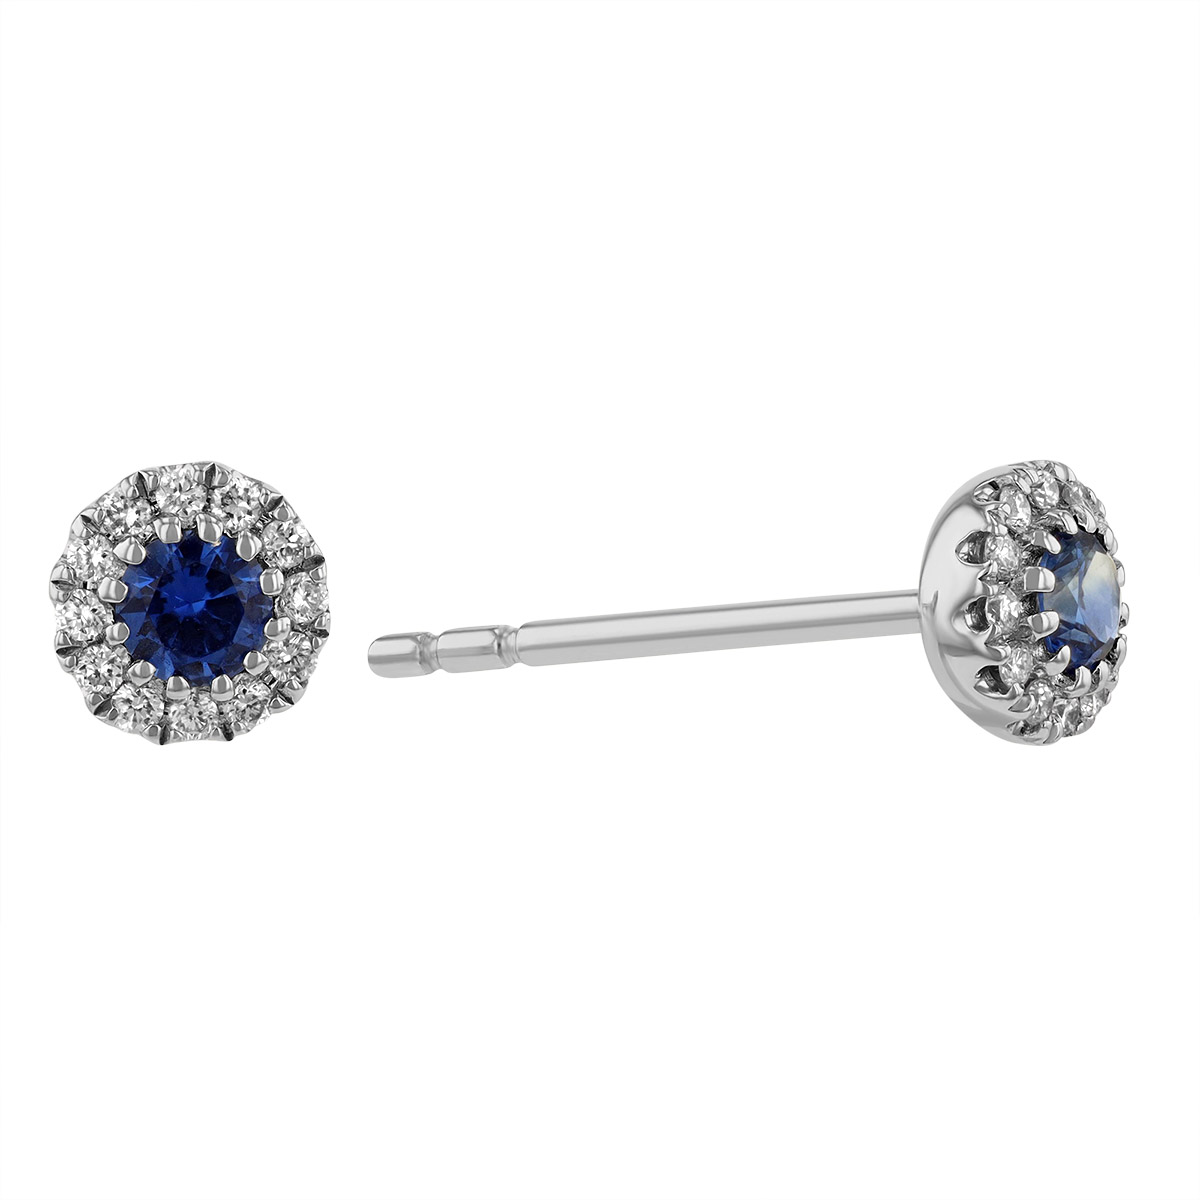 Round Sapphire & Diamond Halo Earrings in White Gold